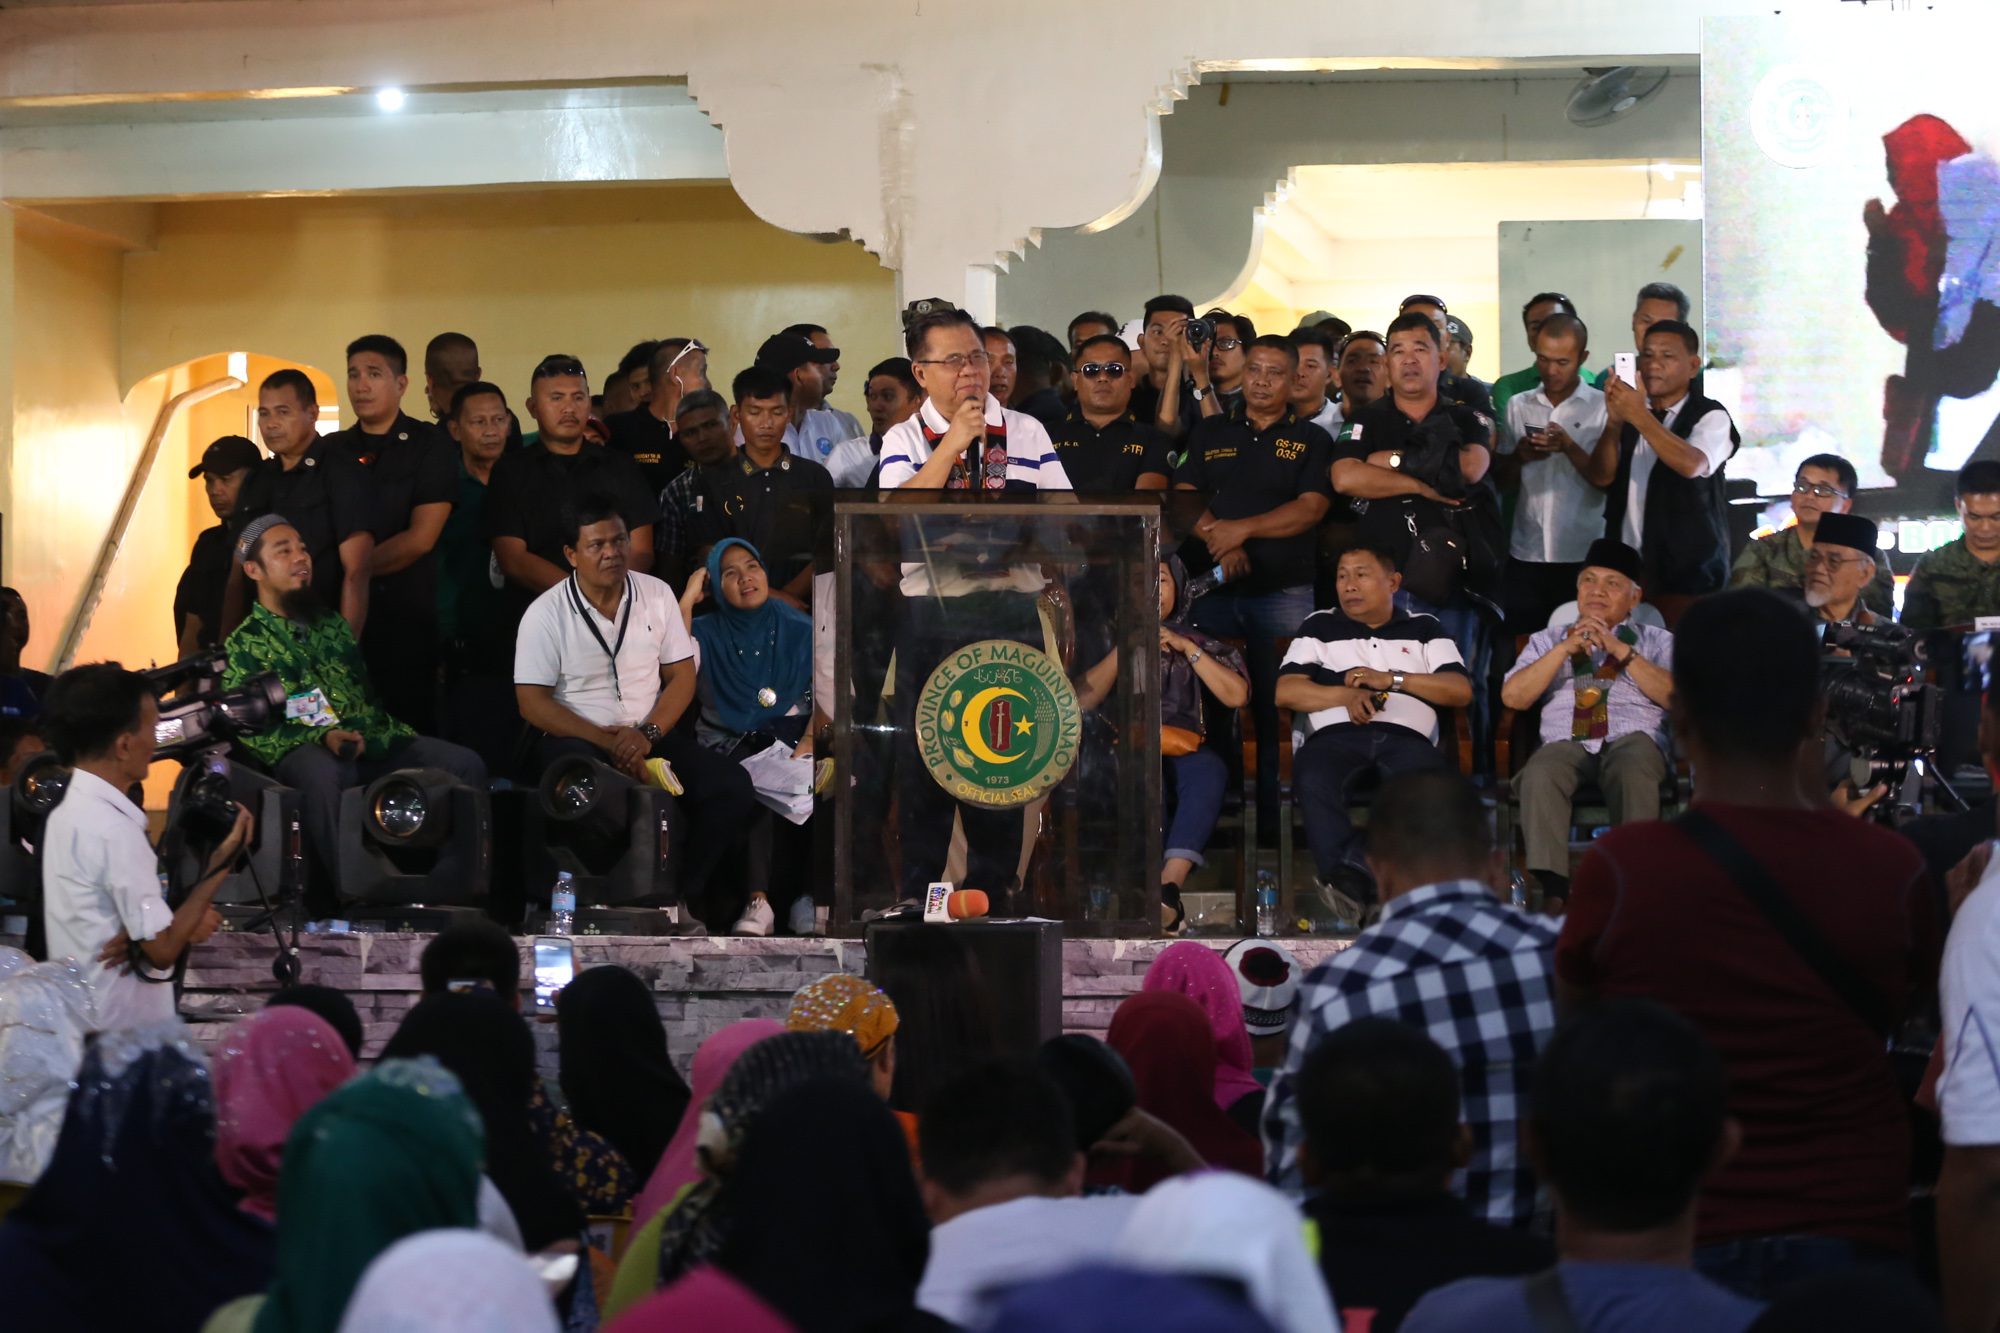 More ARMM youth support Bangsamoro Law – survey